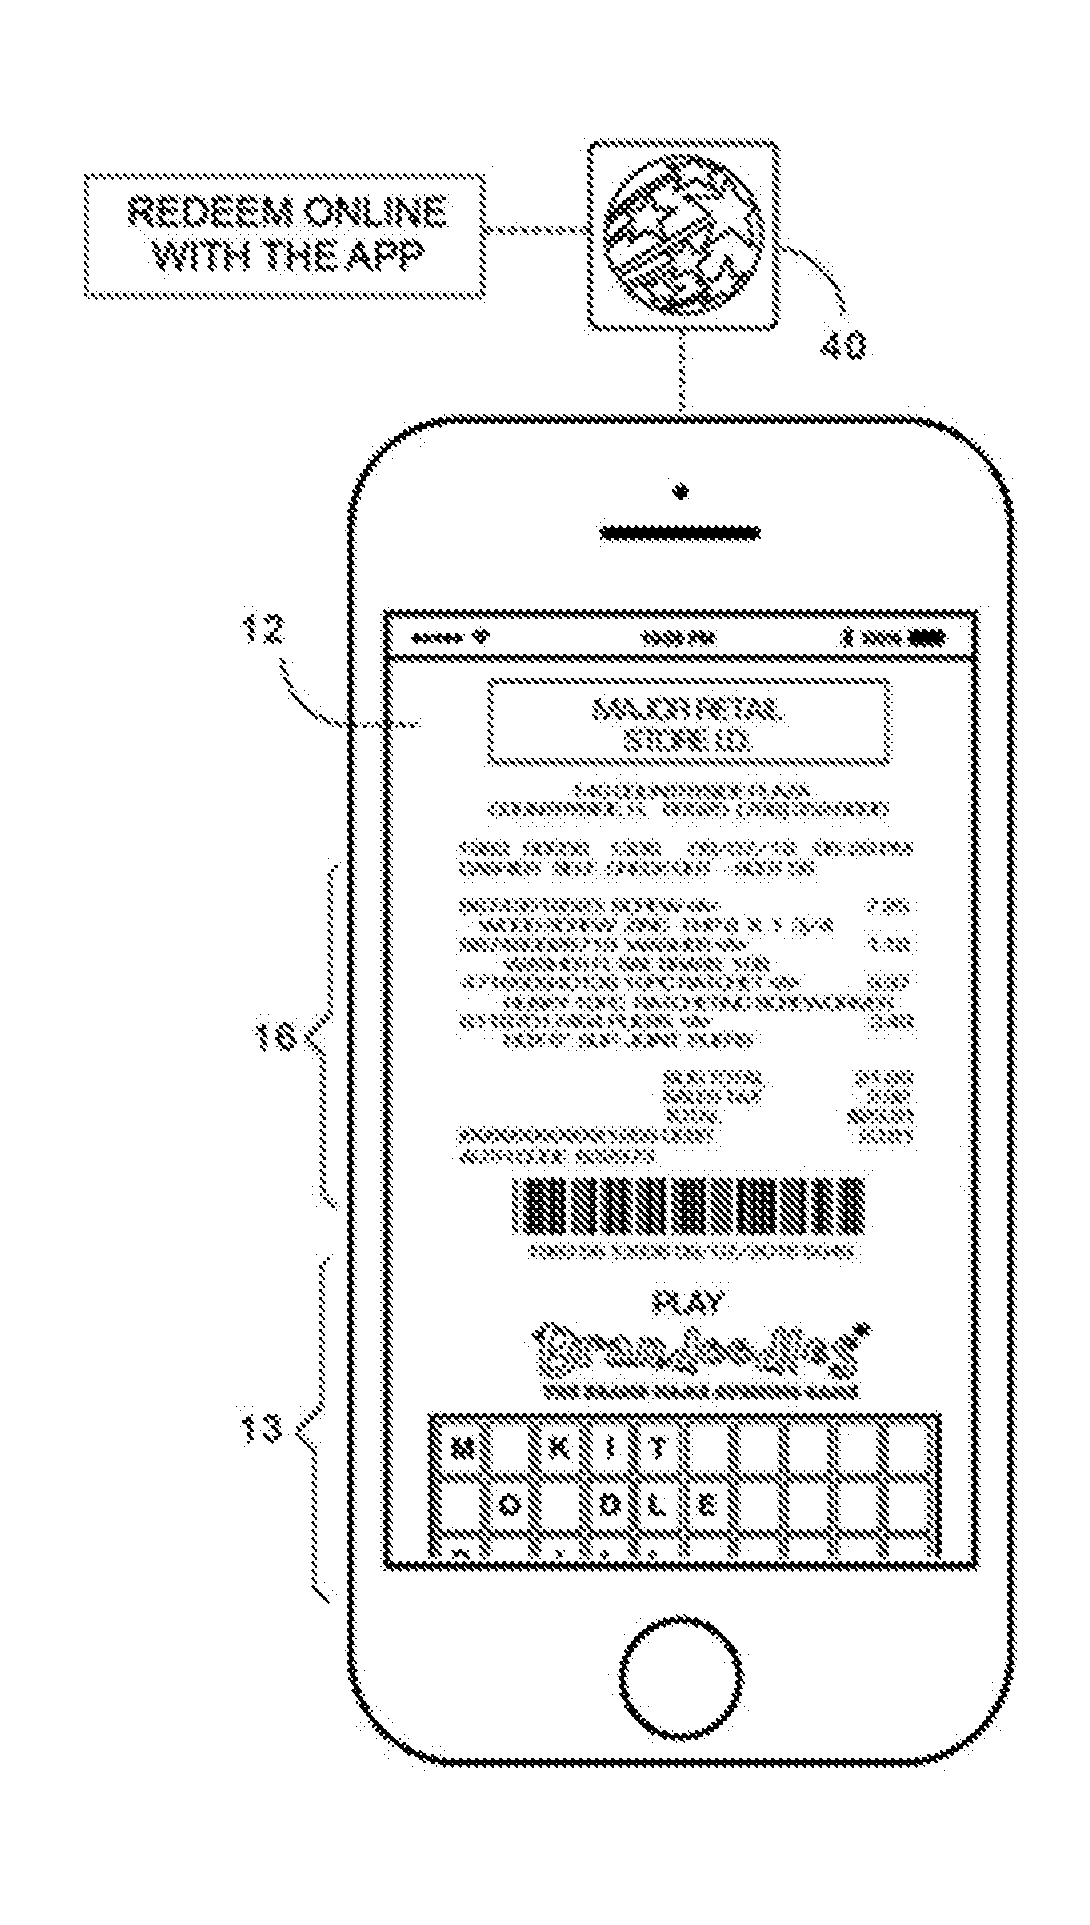 Method and apparatus for promoting sales and increasing brand name recognition